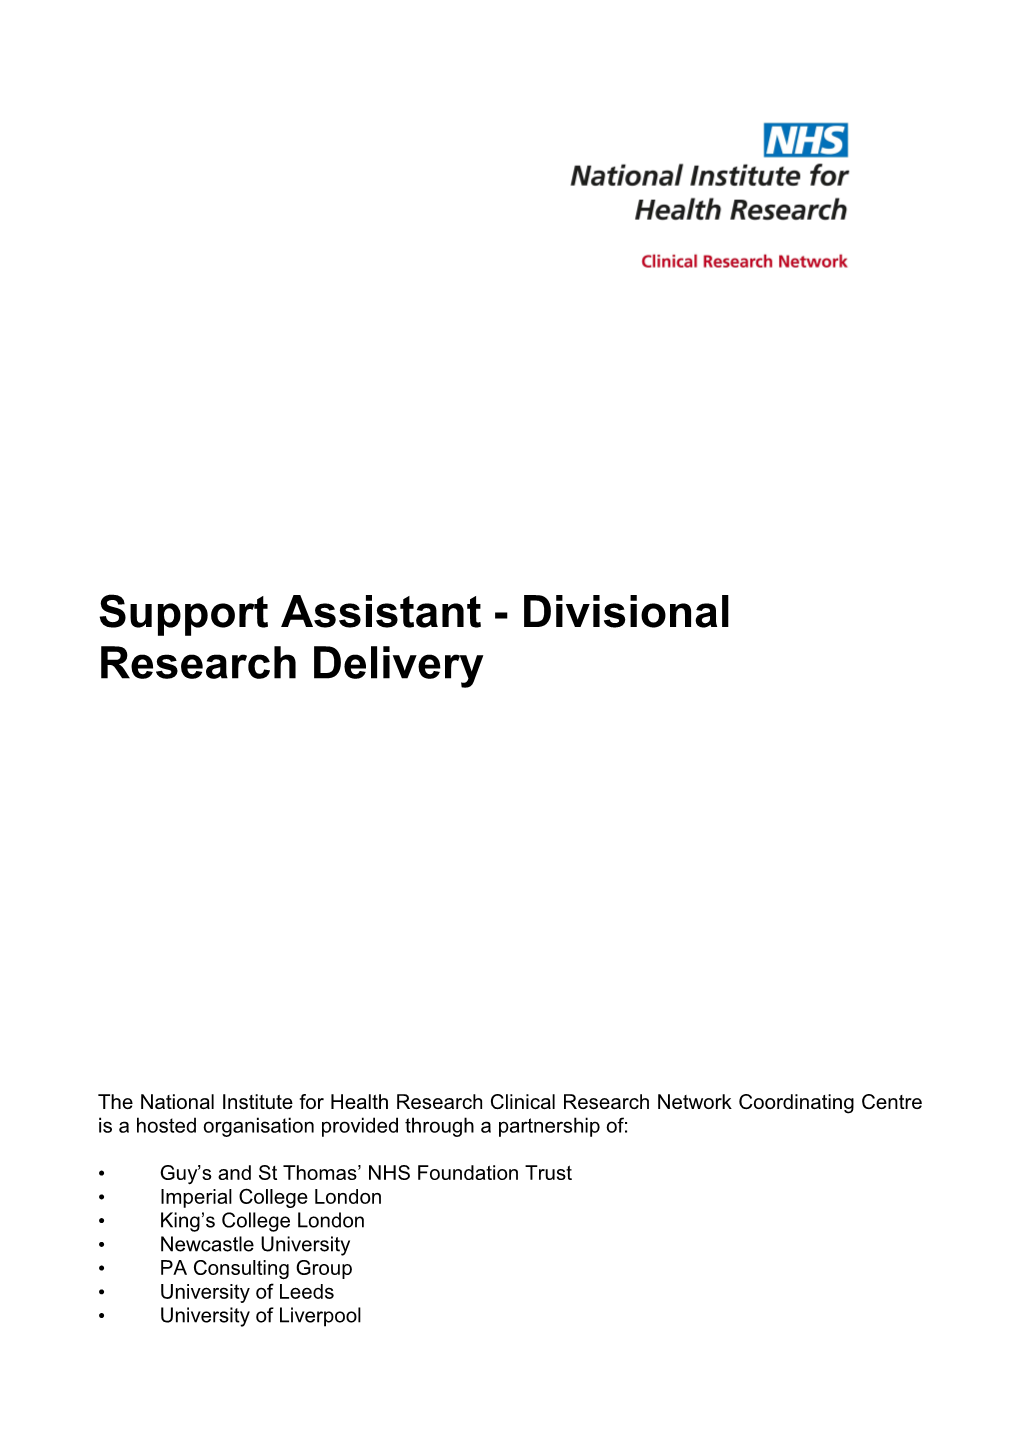 Support Assistant - Divisional Research Delivery